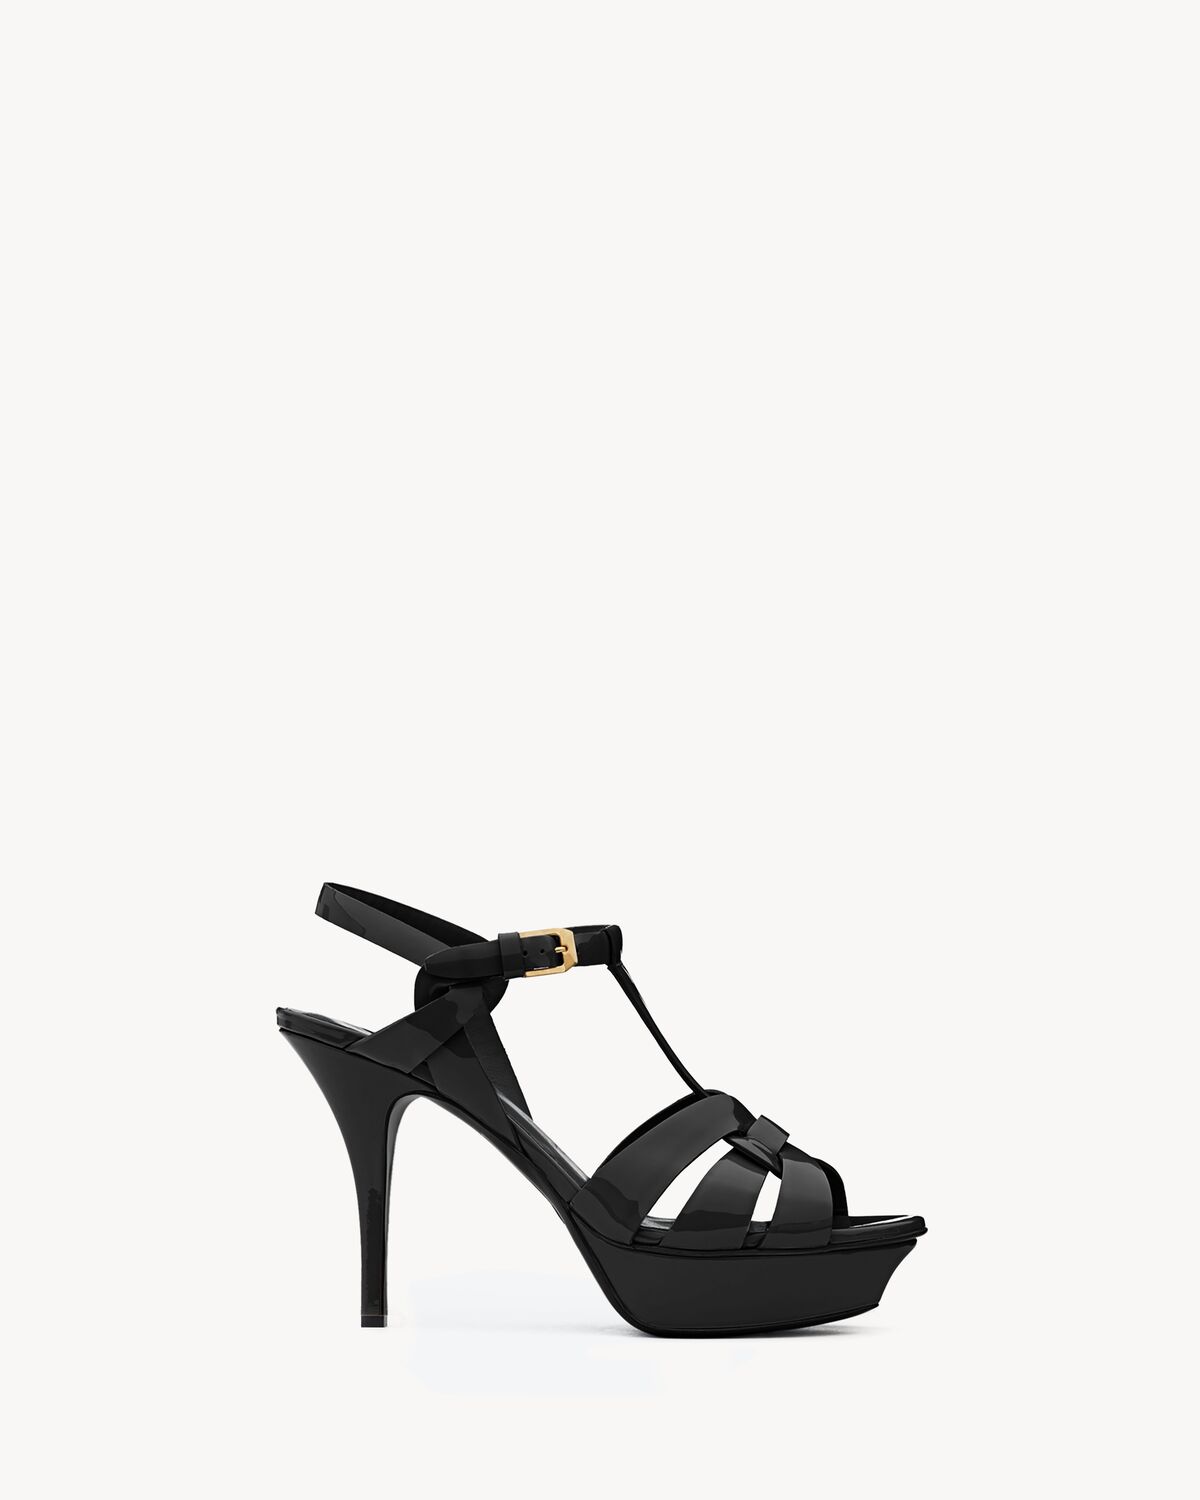 TRIBUTE platform sandals in patent leather